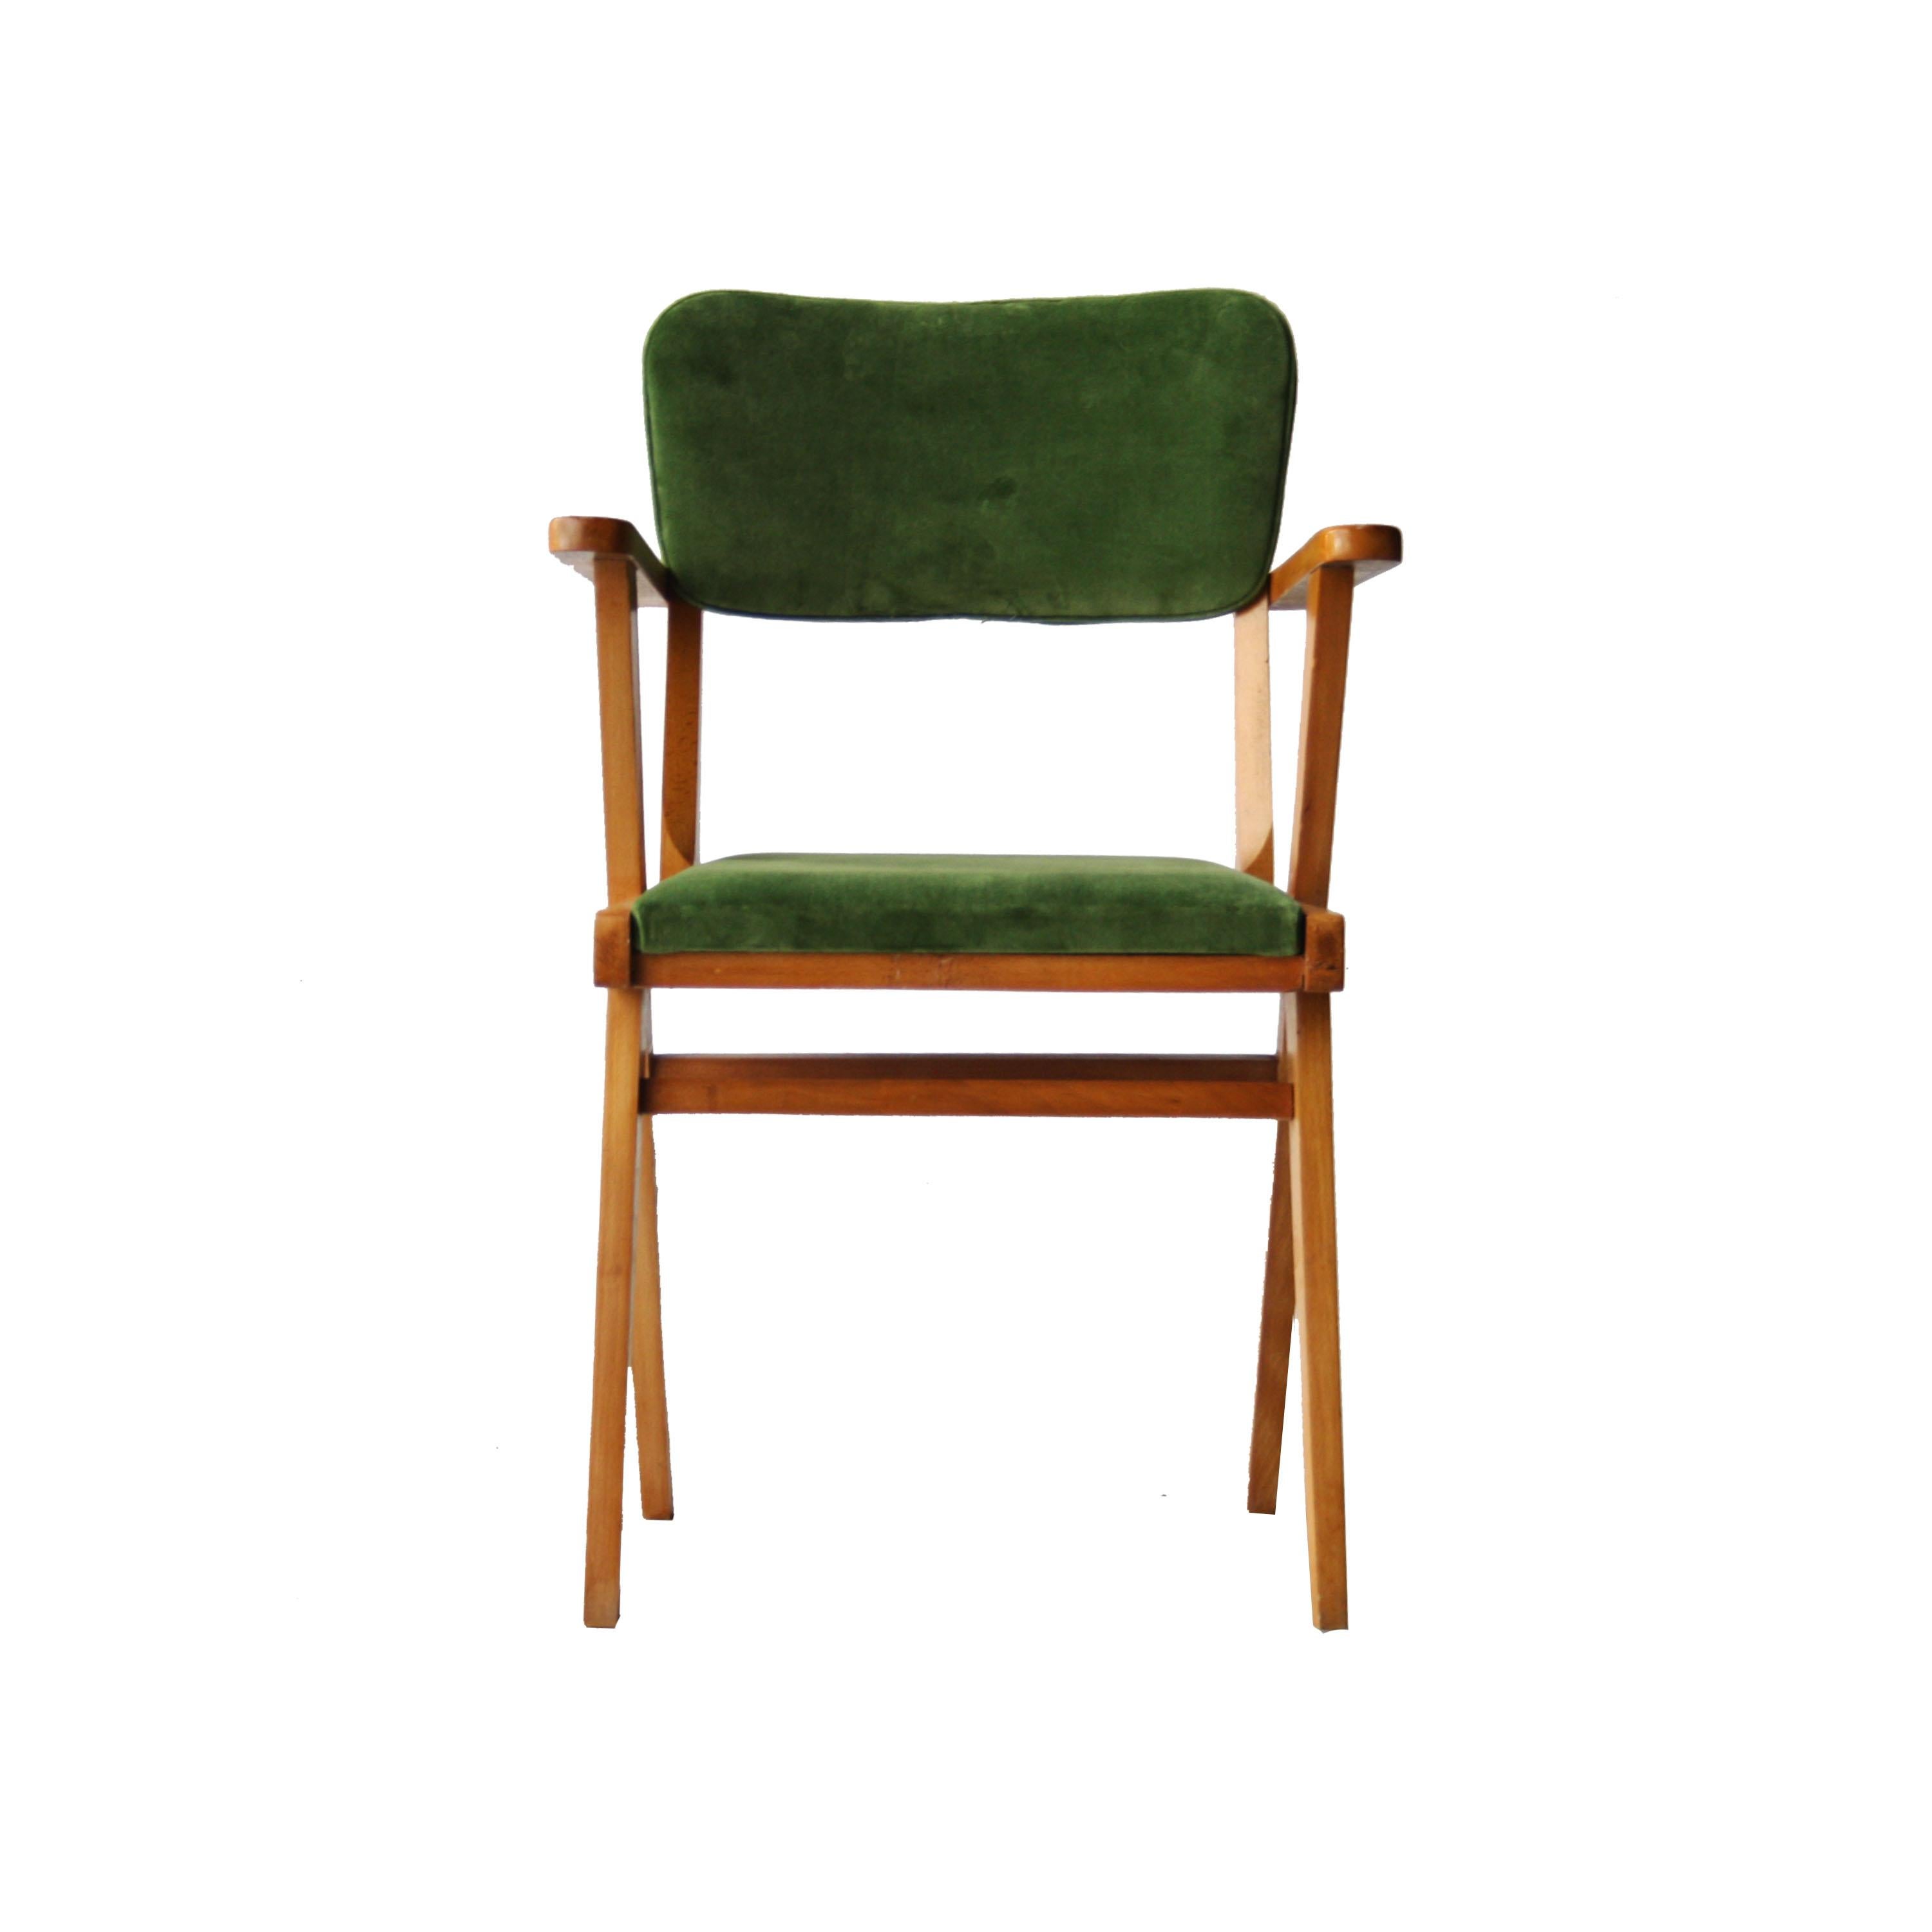 Pair of Italian armchairs with solid wood structure, seat and backrest reupholstered in green cotton velvet.